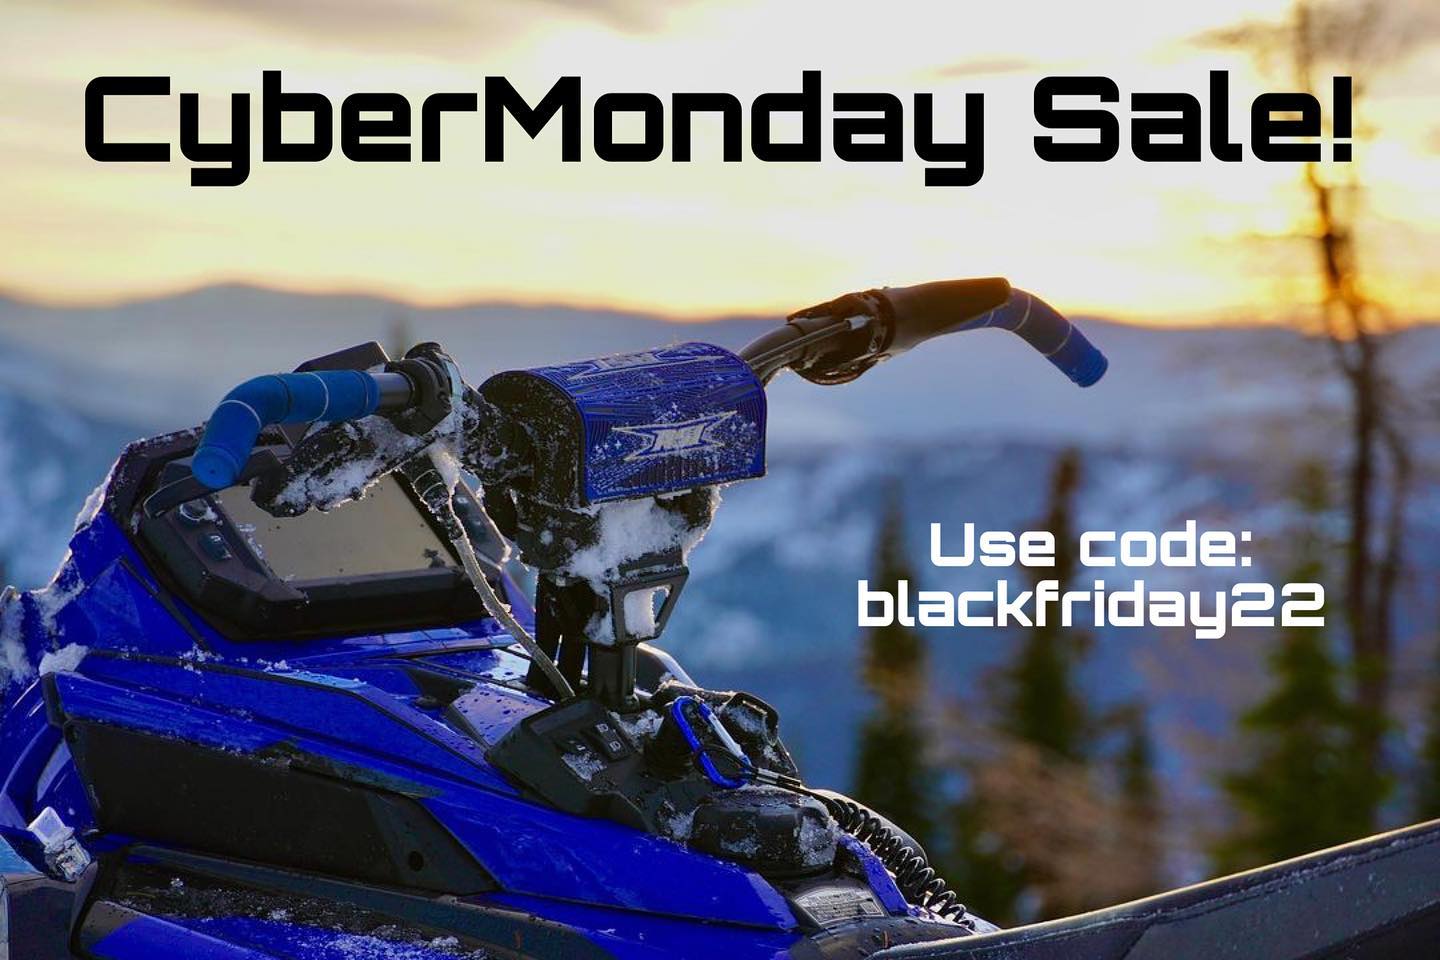 📣 It’s Cyber Monday and the last day of our Black Friday Sale! Use code “blackfriday22” at the check out to receive the 15% discount! Don’t miss out to get the best aftermarket performance products for your rides! 😎

Orders over 💯 bucks receive a free set of 7” grips! 

Get all your aftermarket performance products at rsiracing.com!

#rsi #lynx #polaris #skidoo #arcticcat #yamaha #blackfriday #cybermonday #aftermarketproduct #performanceparts #snowmobile #ridewithus #readytoride